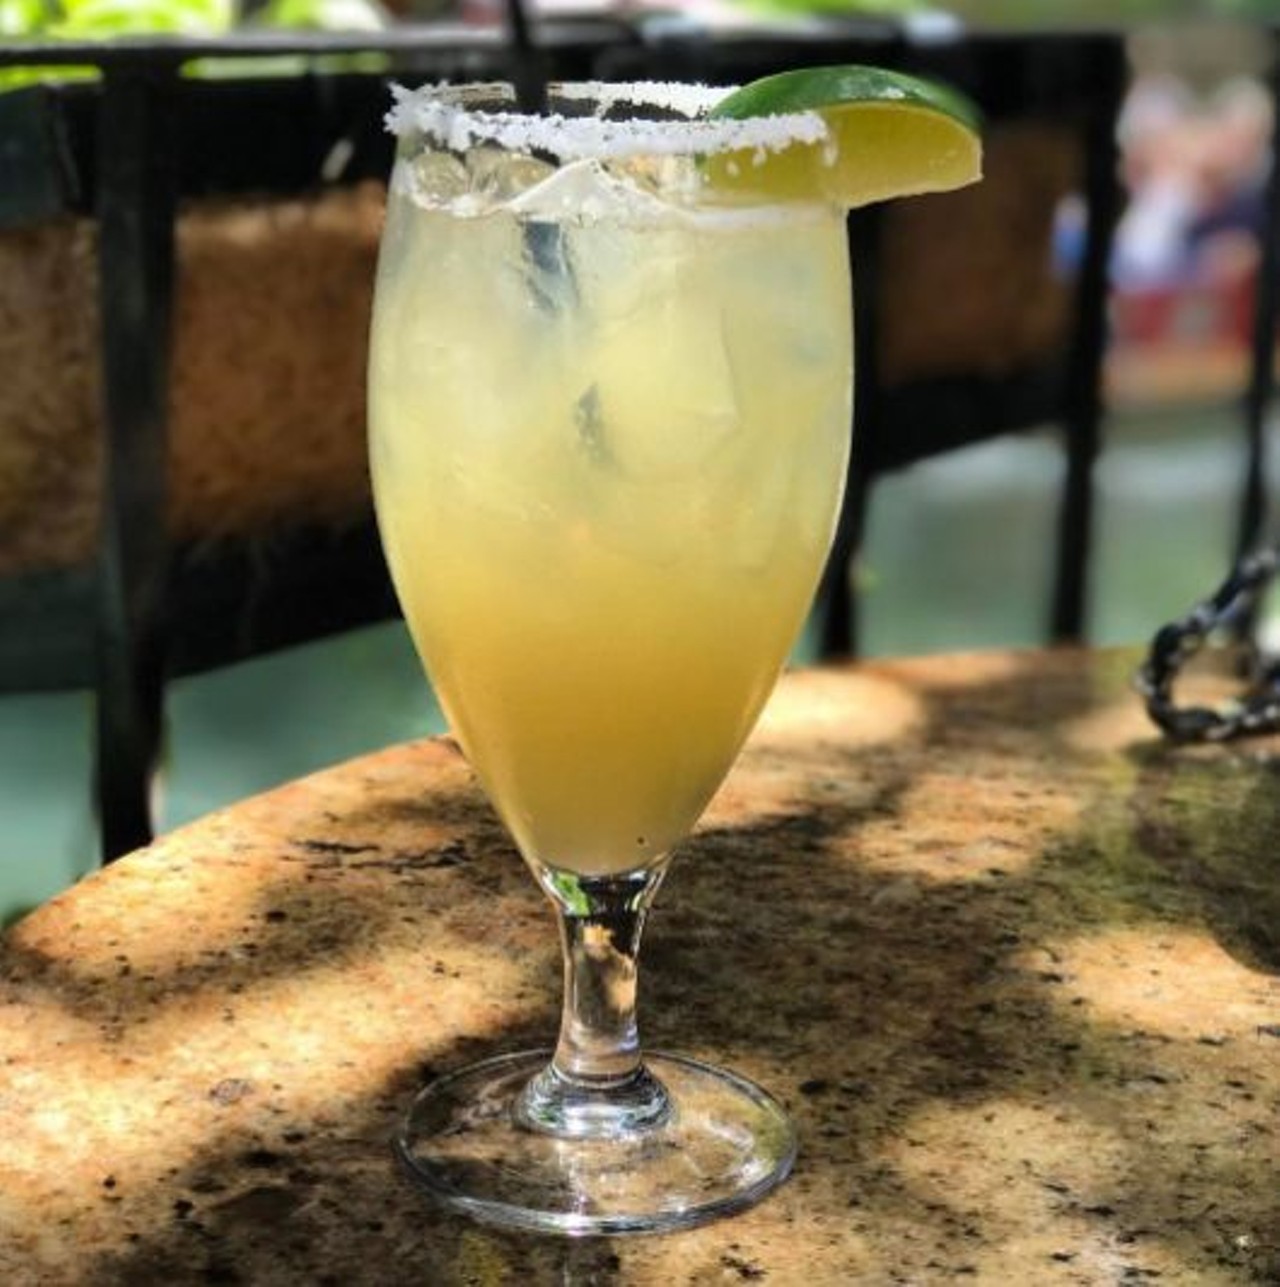 Las Canarias
112 College St., (210) 518-1063 
Located on the Riverwalk, Las Canarias offers great tasting margaritas with a great atmosphere and live music entertainment.
Photo via Instagram, sabordeantonio